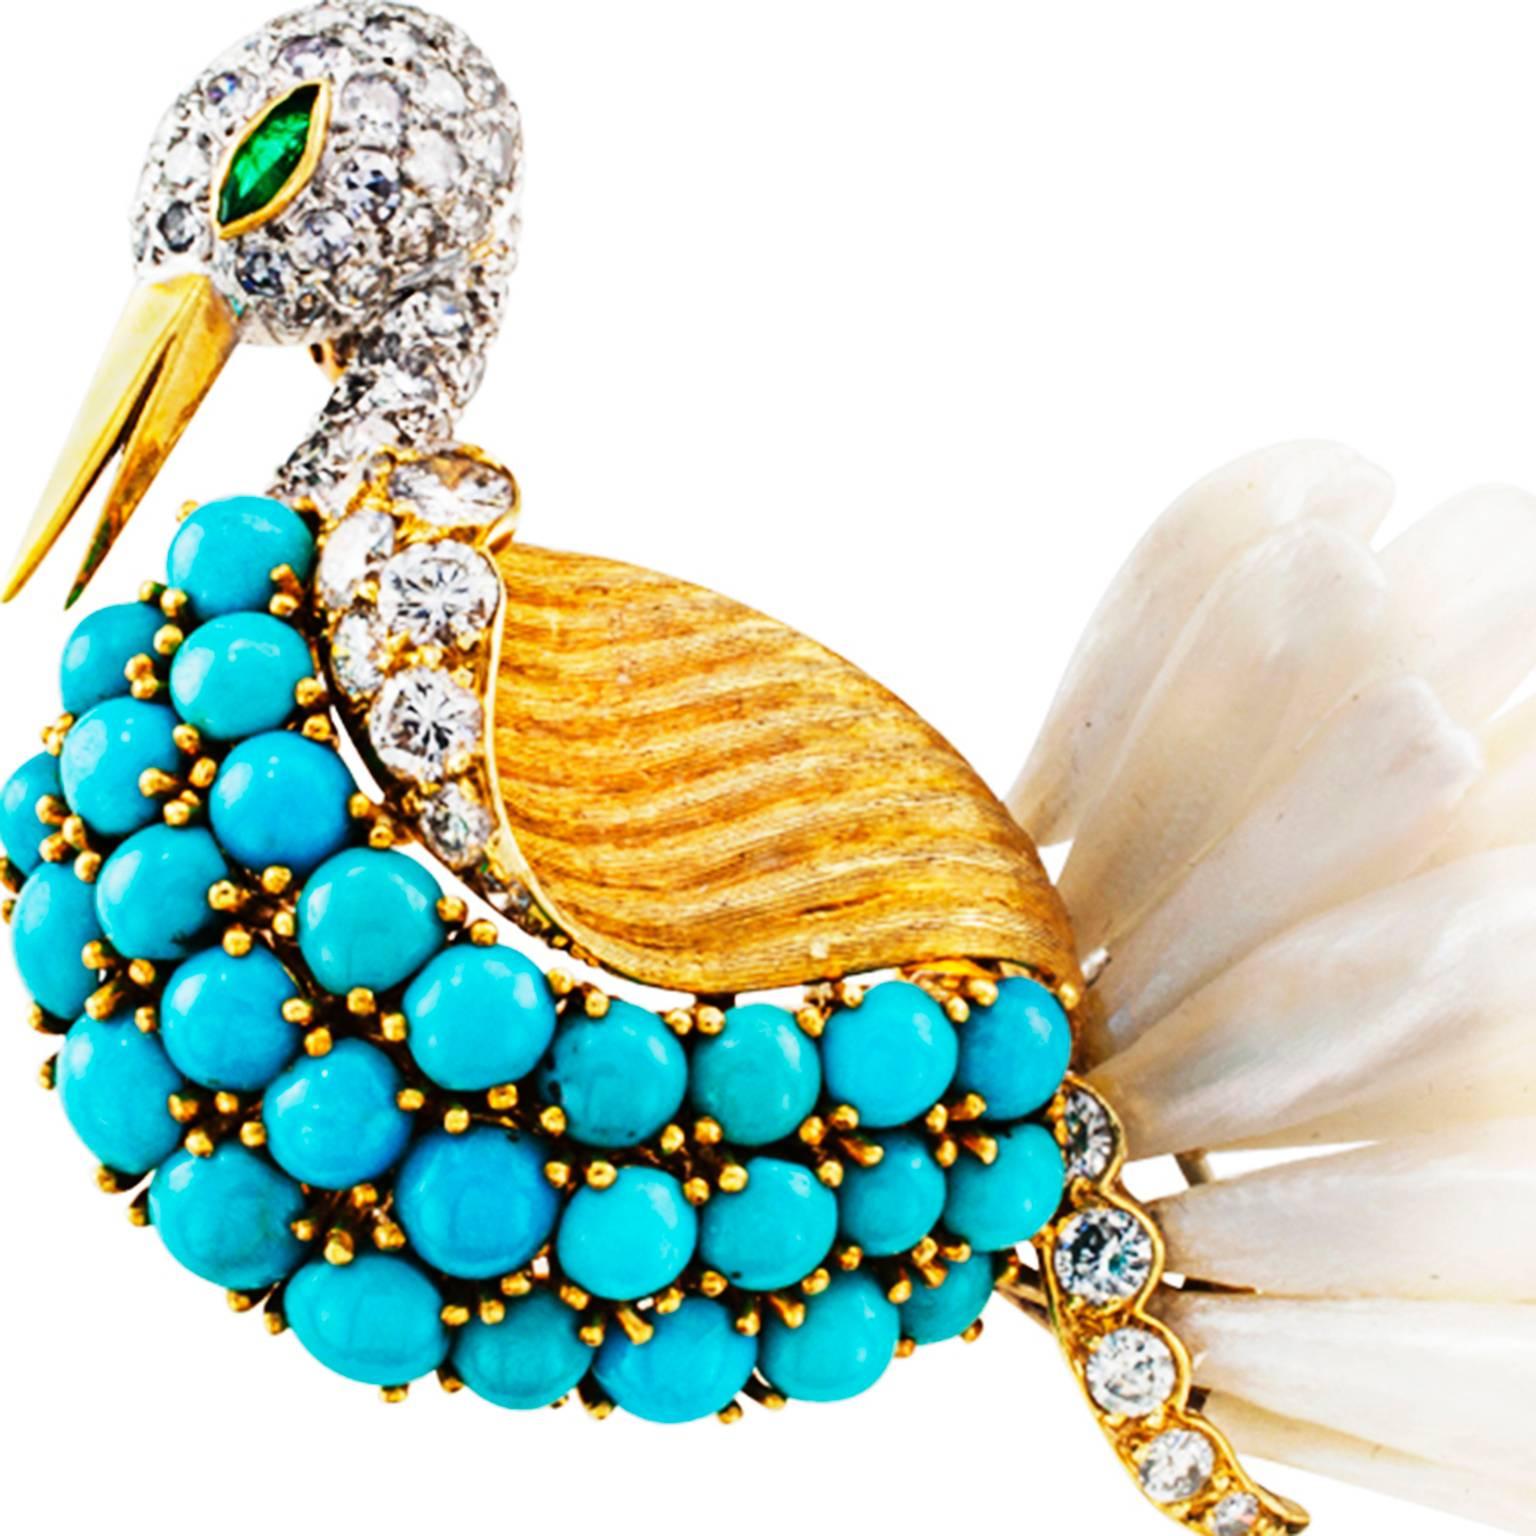 Women's or Men's Swan Brooch Handcrafted with Petal Pearls Turquoise and Diamonds